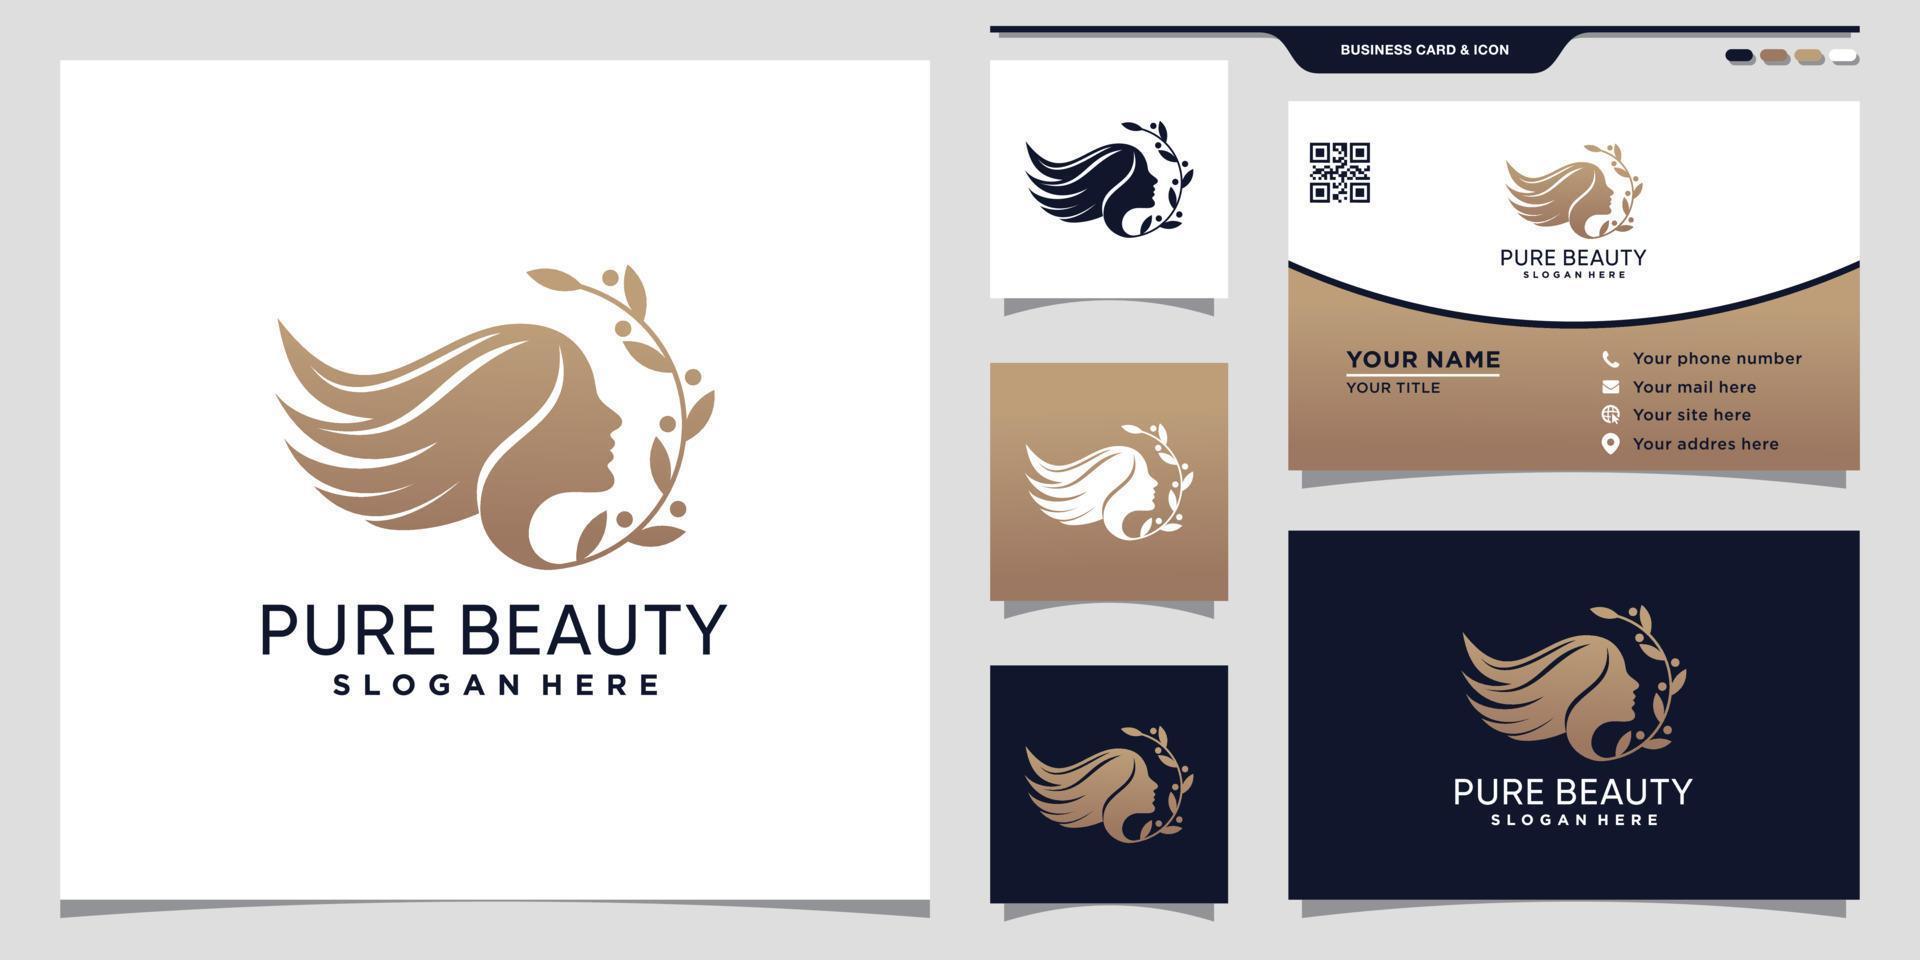 Pure beauty logo with woman face and business card design vector